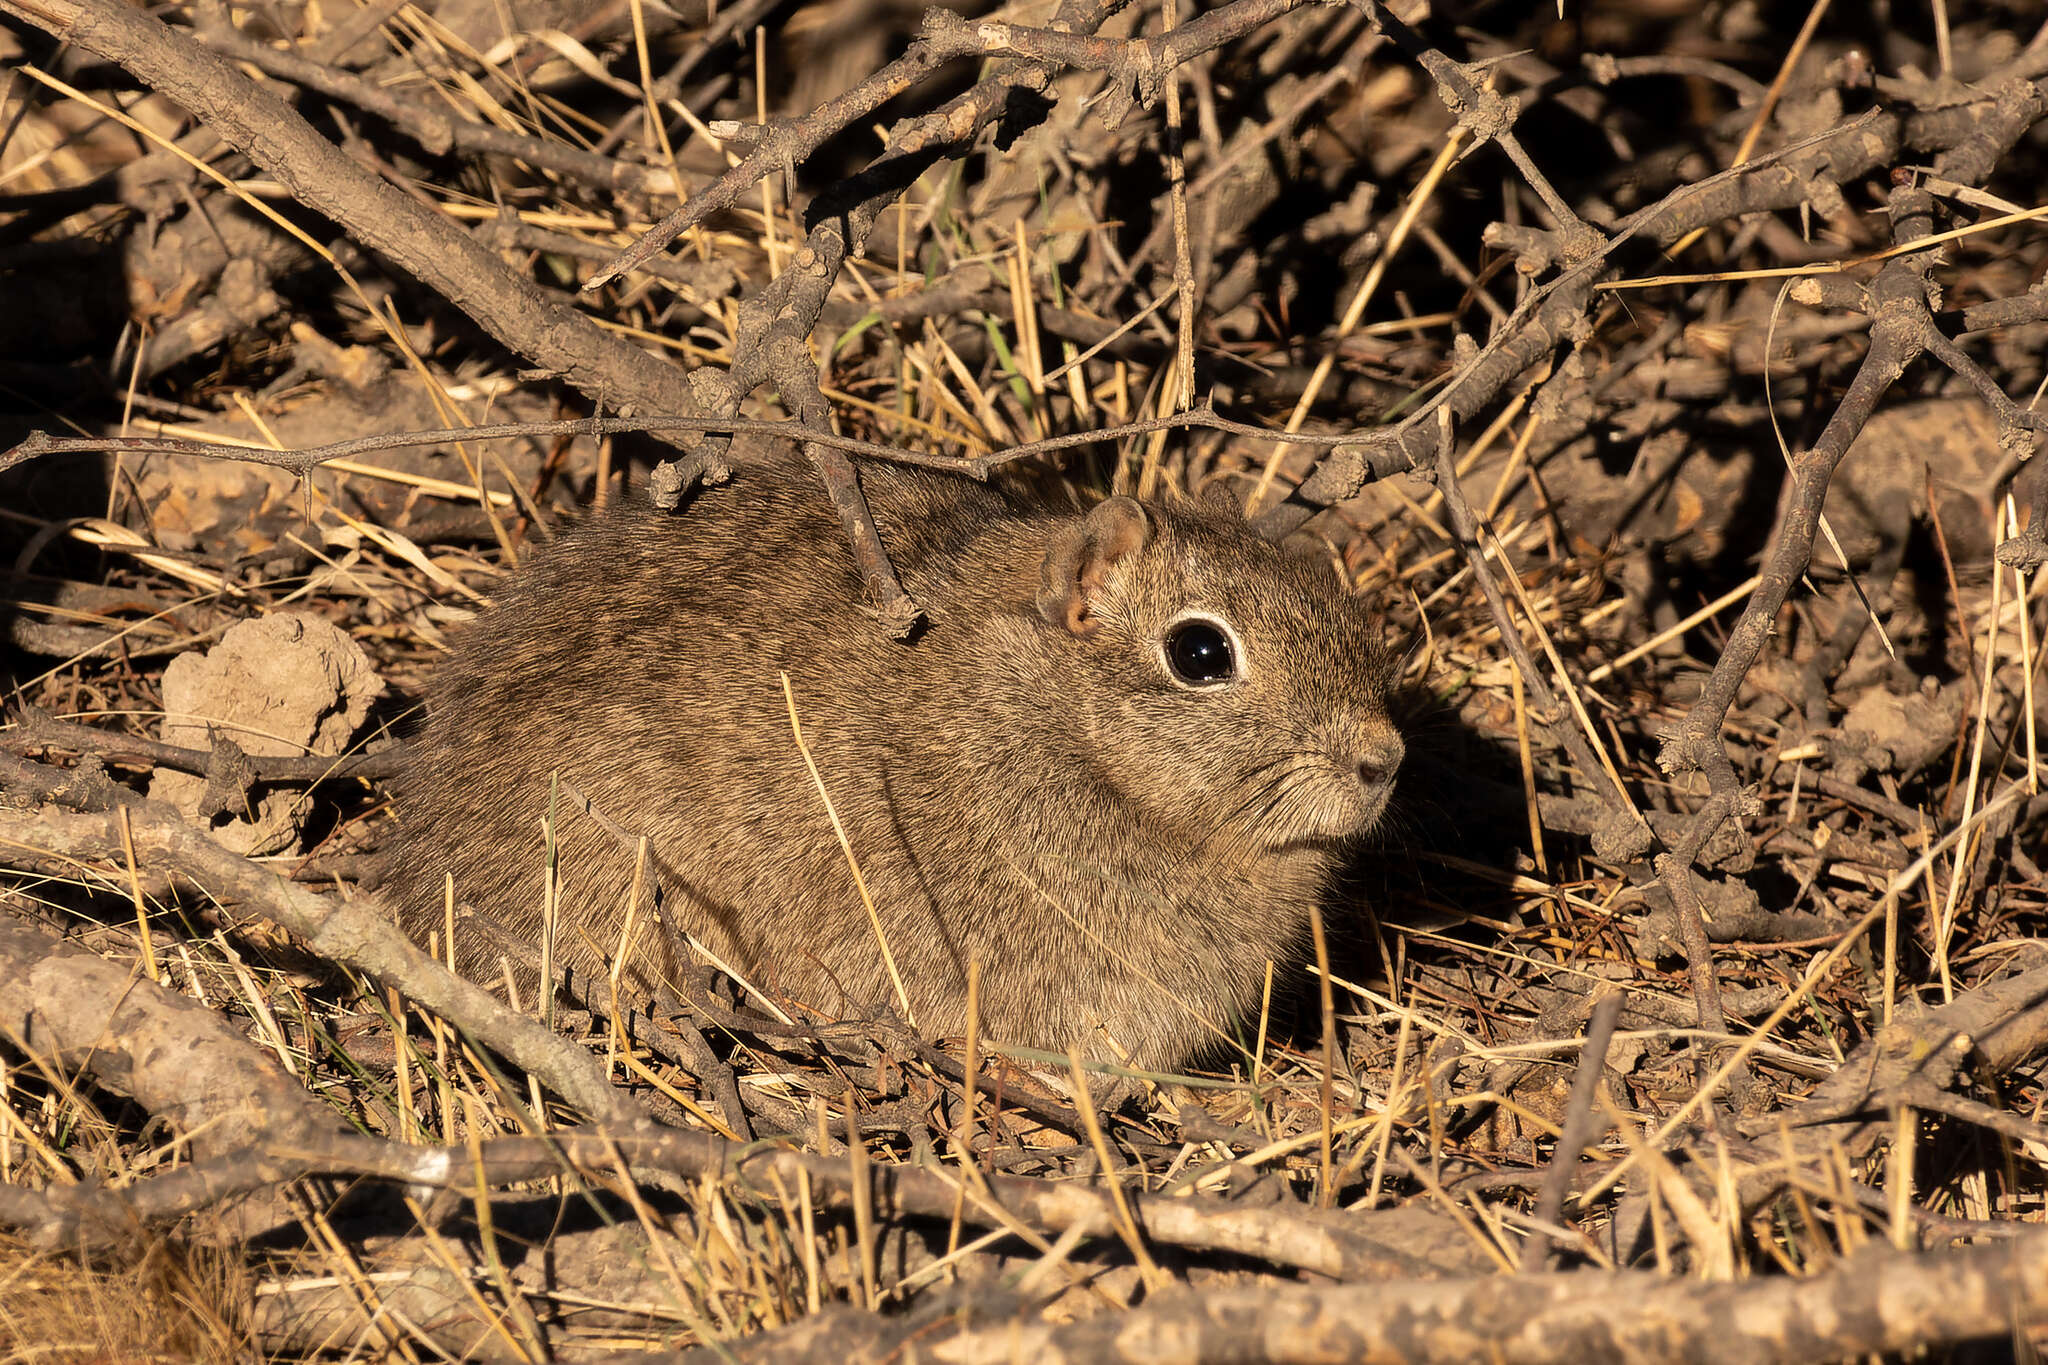 Image of Southern Mountain Cavy